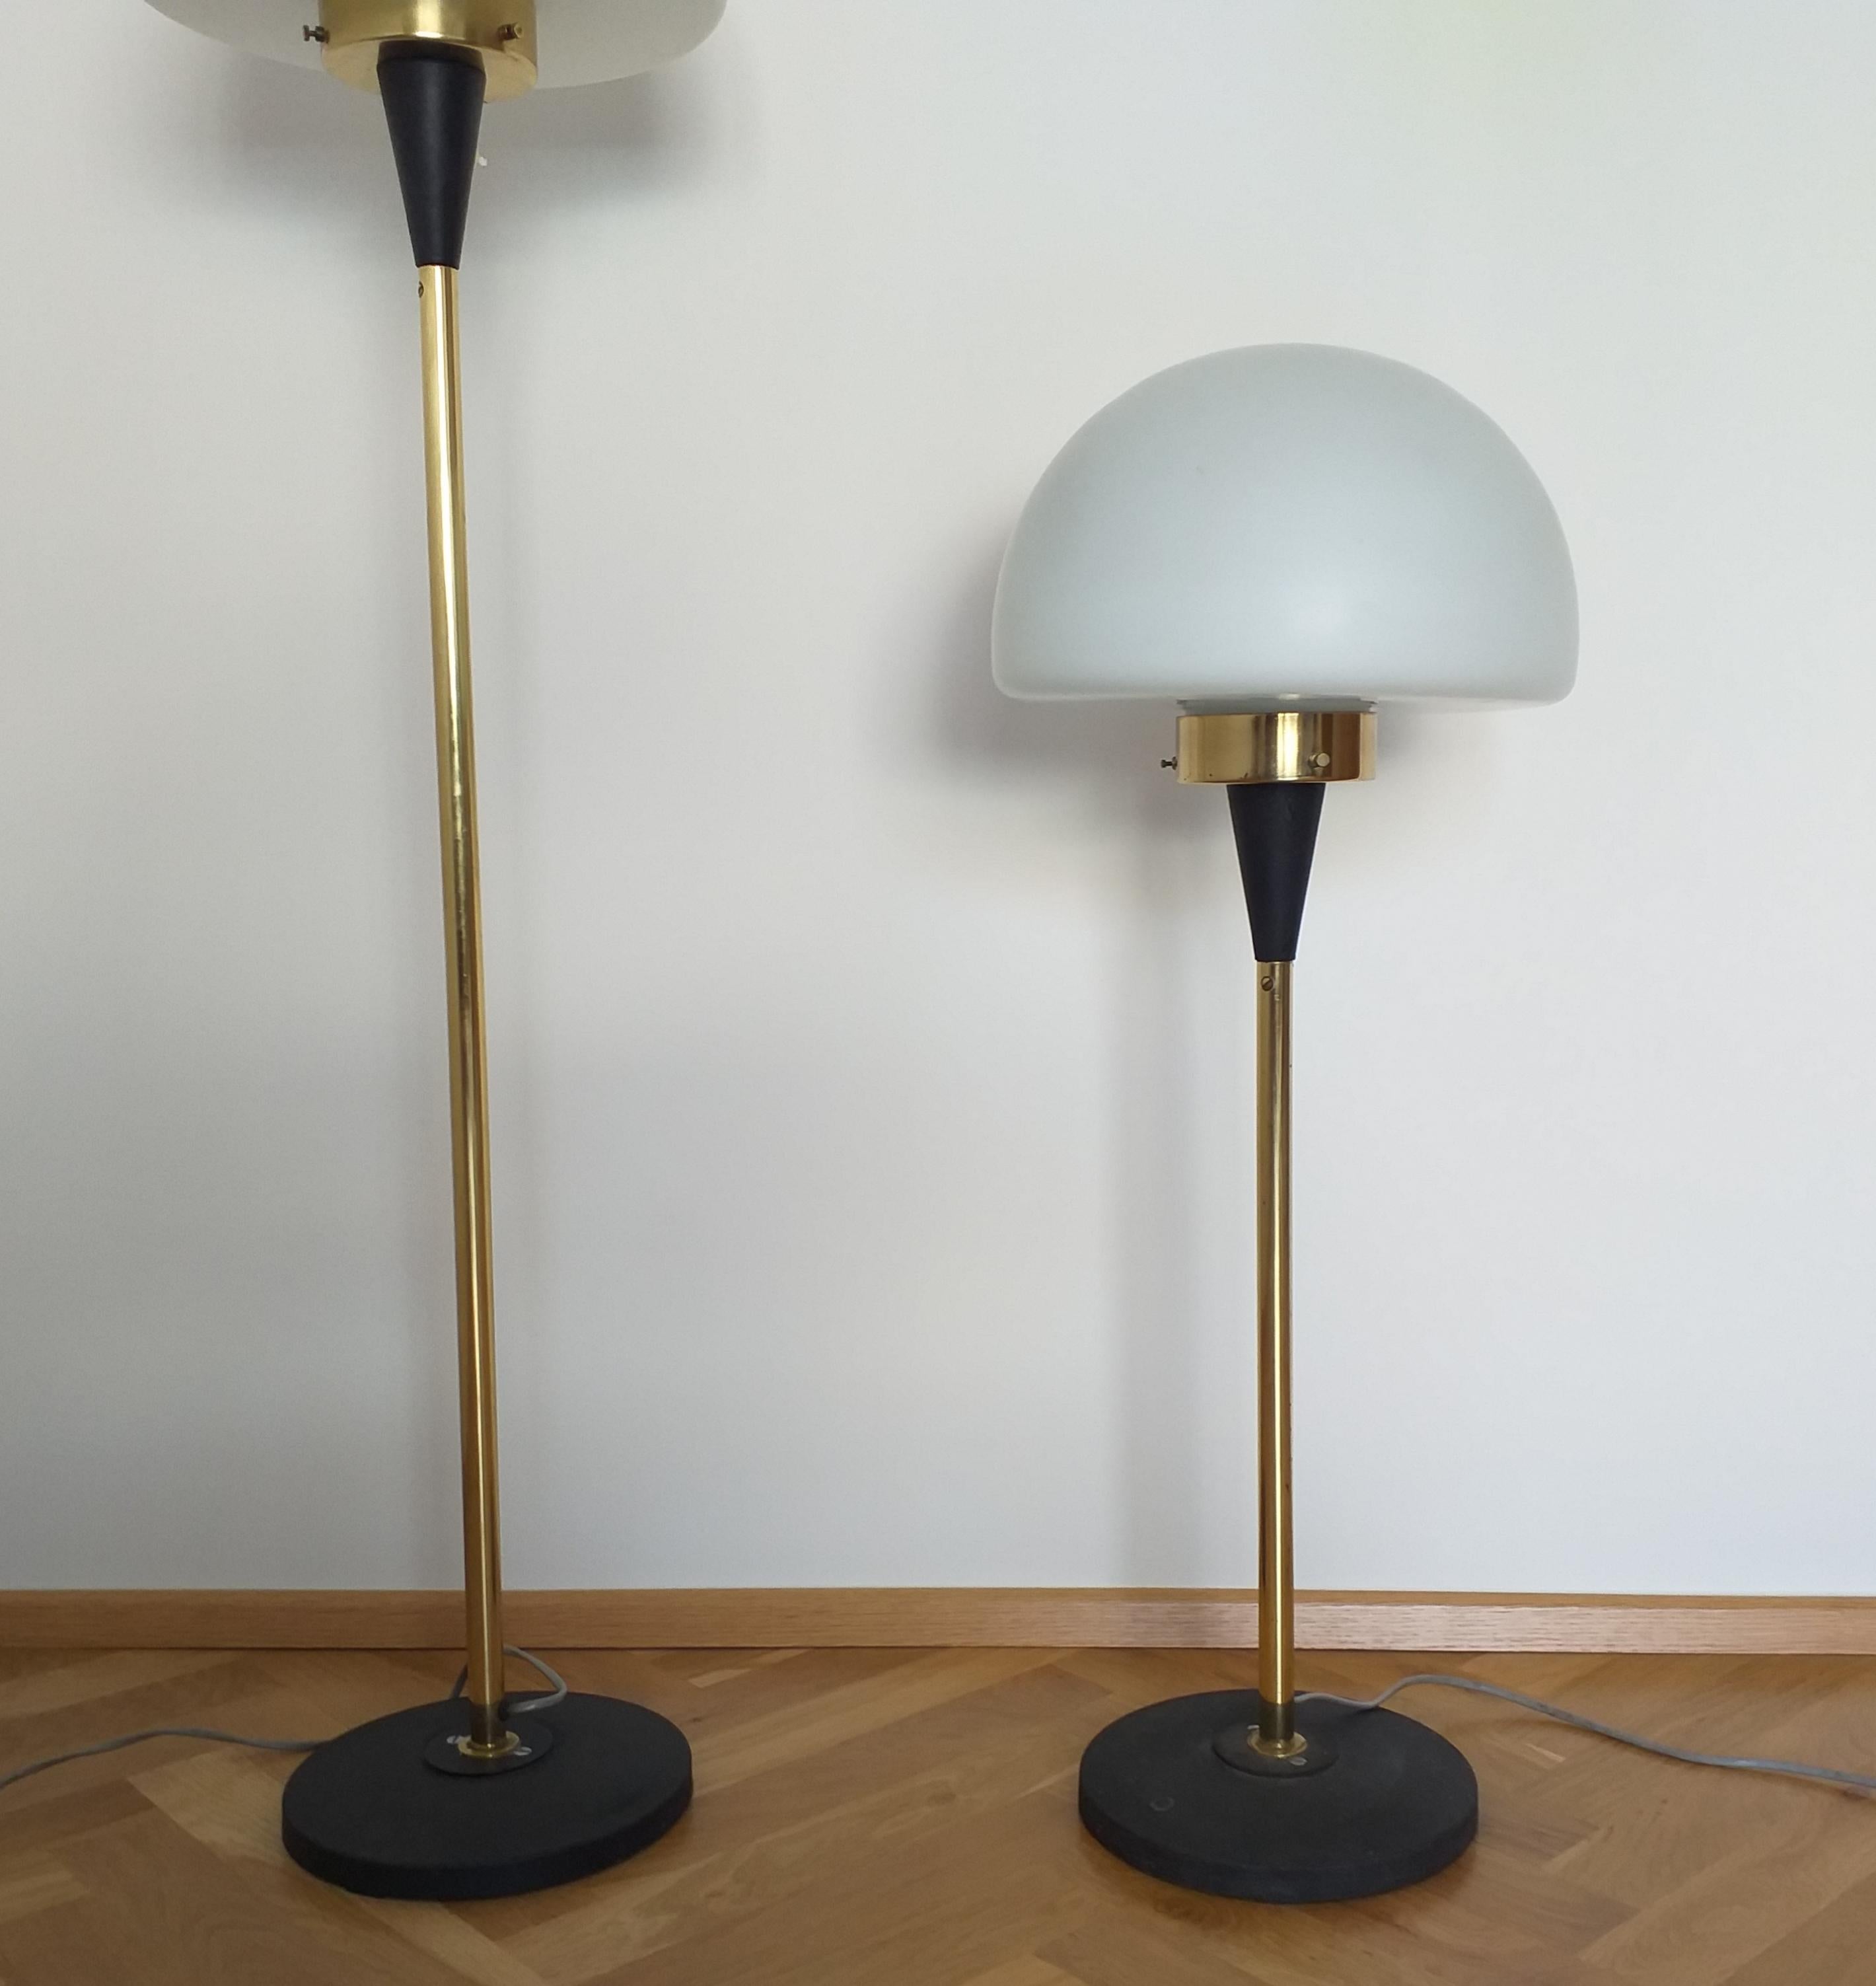 Set of Two Floor Lamps Lidokov Designed by Josef Hurka, 1970s For Sale 4